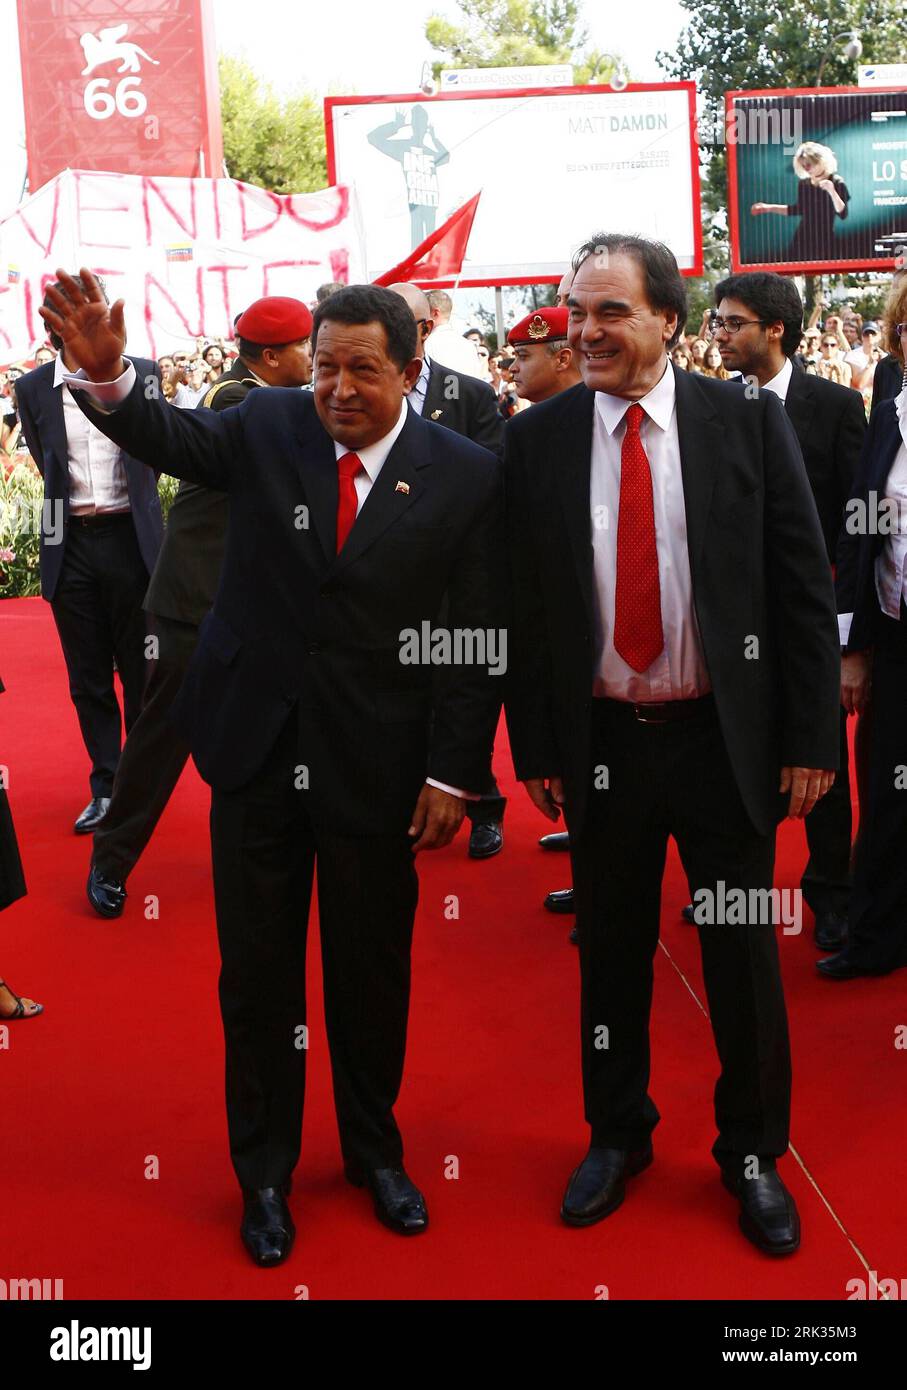 Bildnummer: 53326109  Datum: 08.09.2009  Copyright: imago/Xinhua (090908) -- VENICE, September 8, 2009 (Xinhua) -- Venezuelan President Hugo Chavez (L) and U.S. director Oliver Stone (R) pose for photographers on the red carpet prior to the screening of Stone s film South of the Border during the 66th Venice International Film Festival on September 7, 2009. (Xinhua Photo) (nxl) (3)ITALY-VENICE-FILM-SOUTH OF BORDER-CHAVEZ PUBLICATIONxNOTxINxCHN People Politik Kbdig xdp 2009 hoch    Bildnummer 53326109 Date 08 09 2009 Copyright Imago XINHUA  Venice September 8 2009 XINHUA Venezuelan President Hu Stock Photo